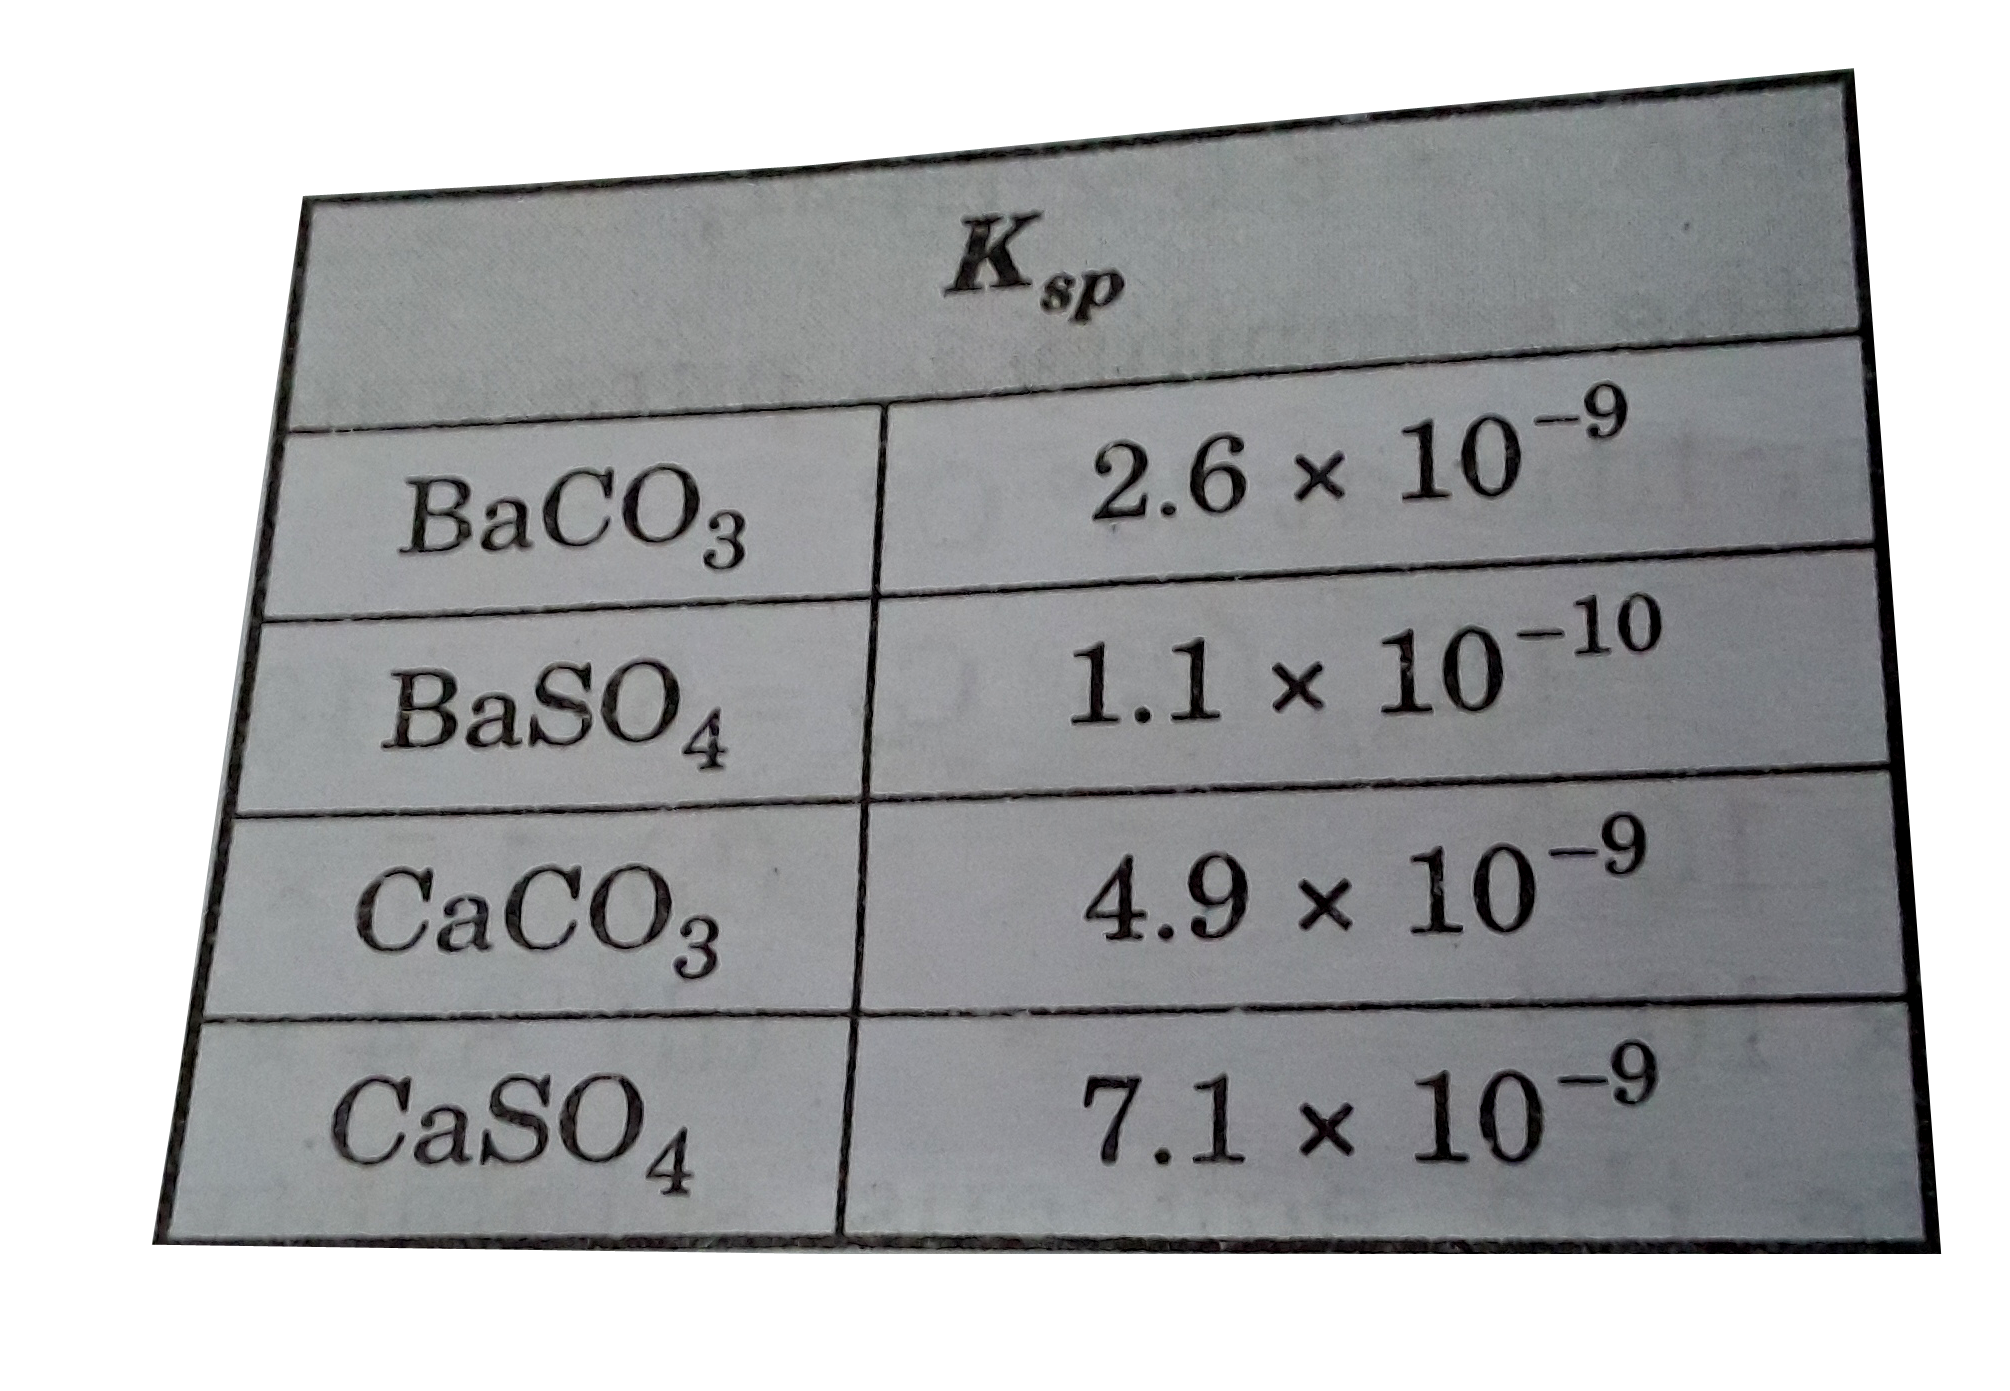 When the compounds below are arranged in order of increasing solubility in water, which order is correct?